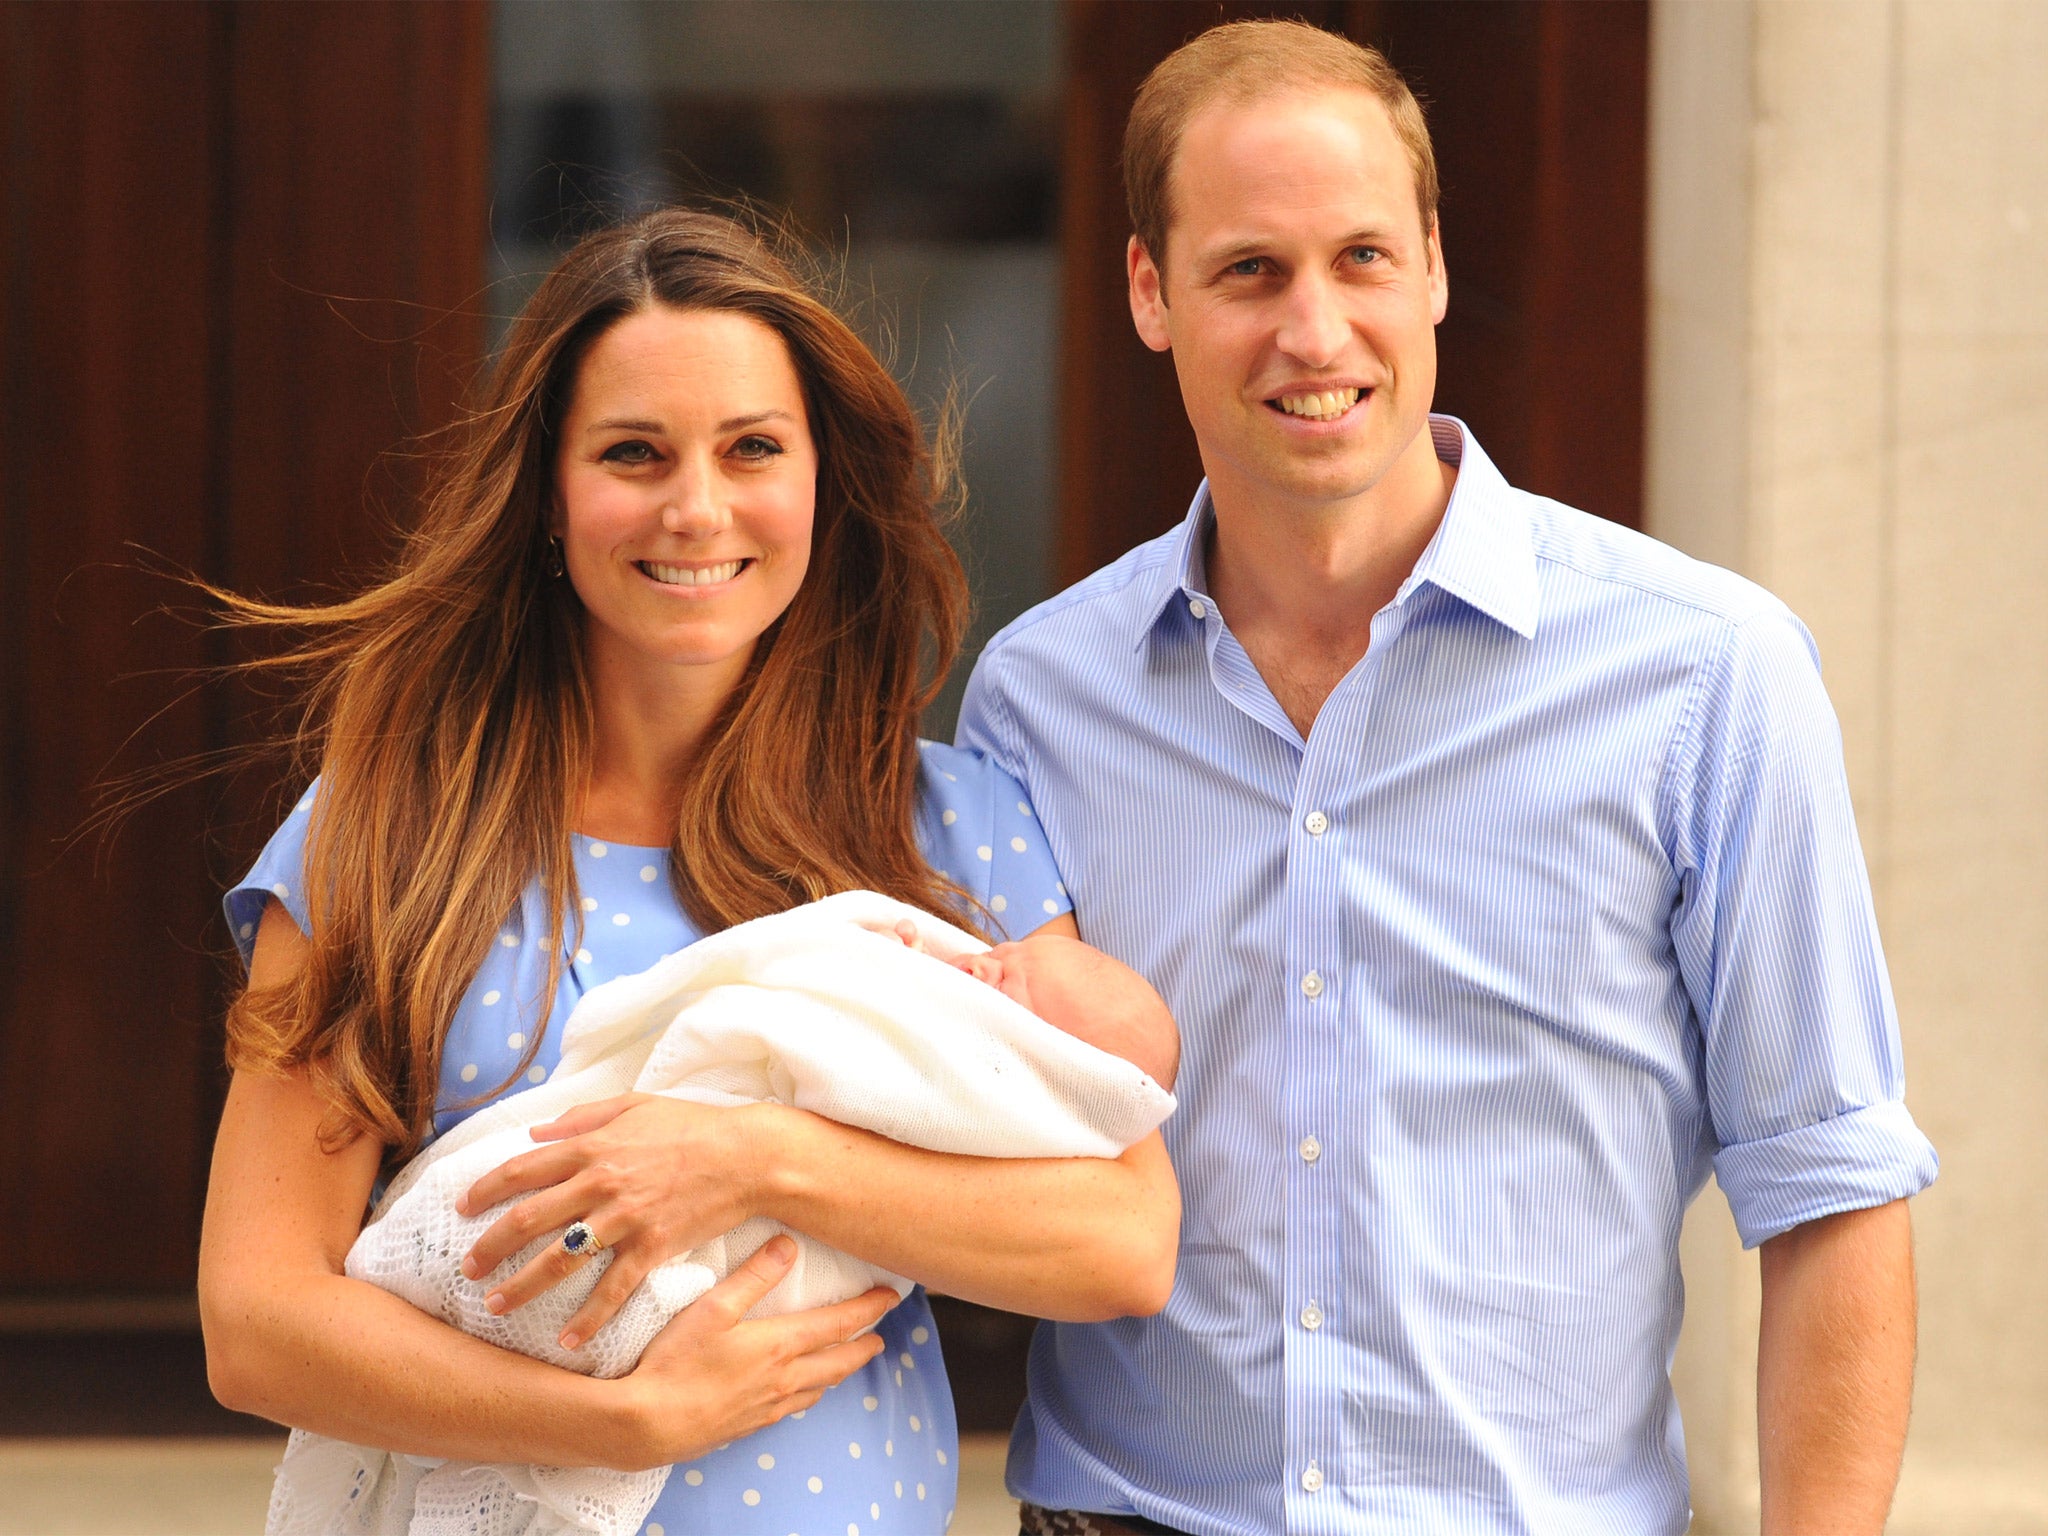 Royal assent: ‘Hello!’ got the green light for its planned publication of pictures of the royals